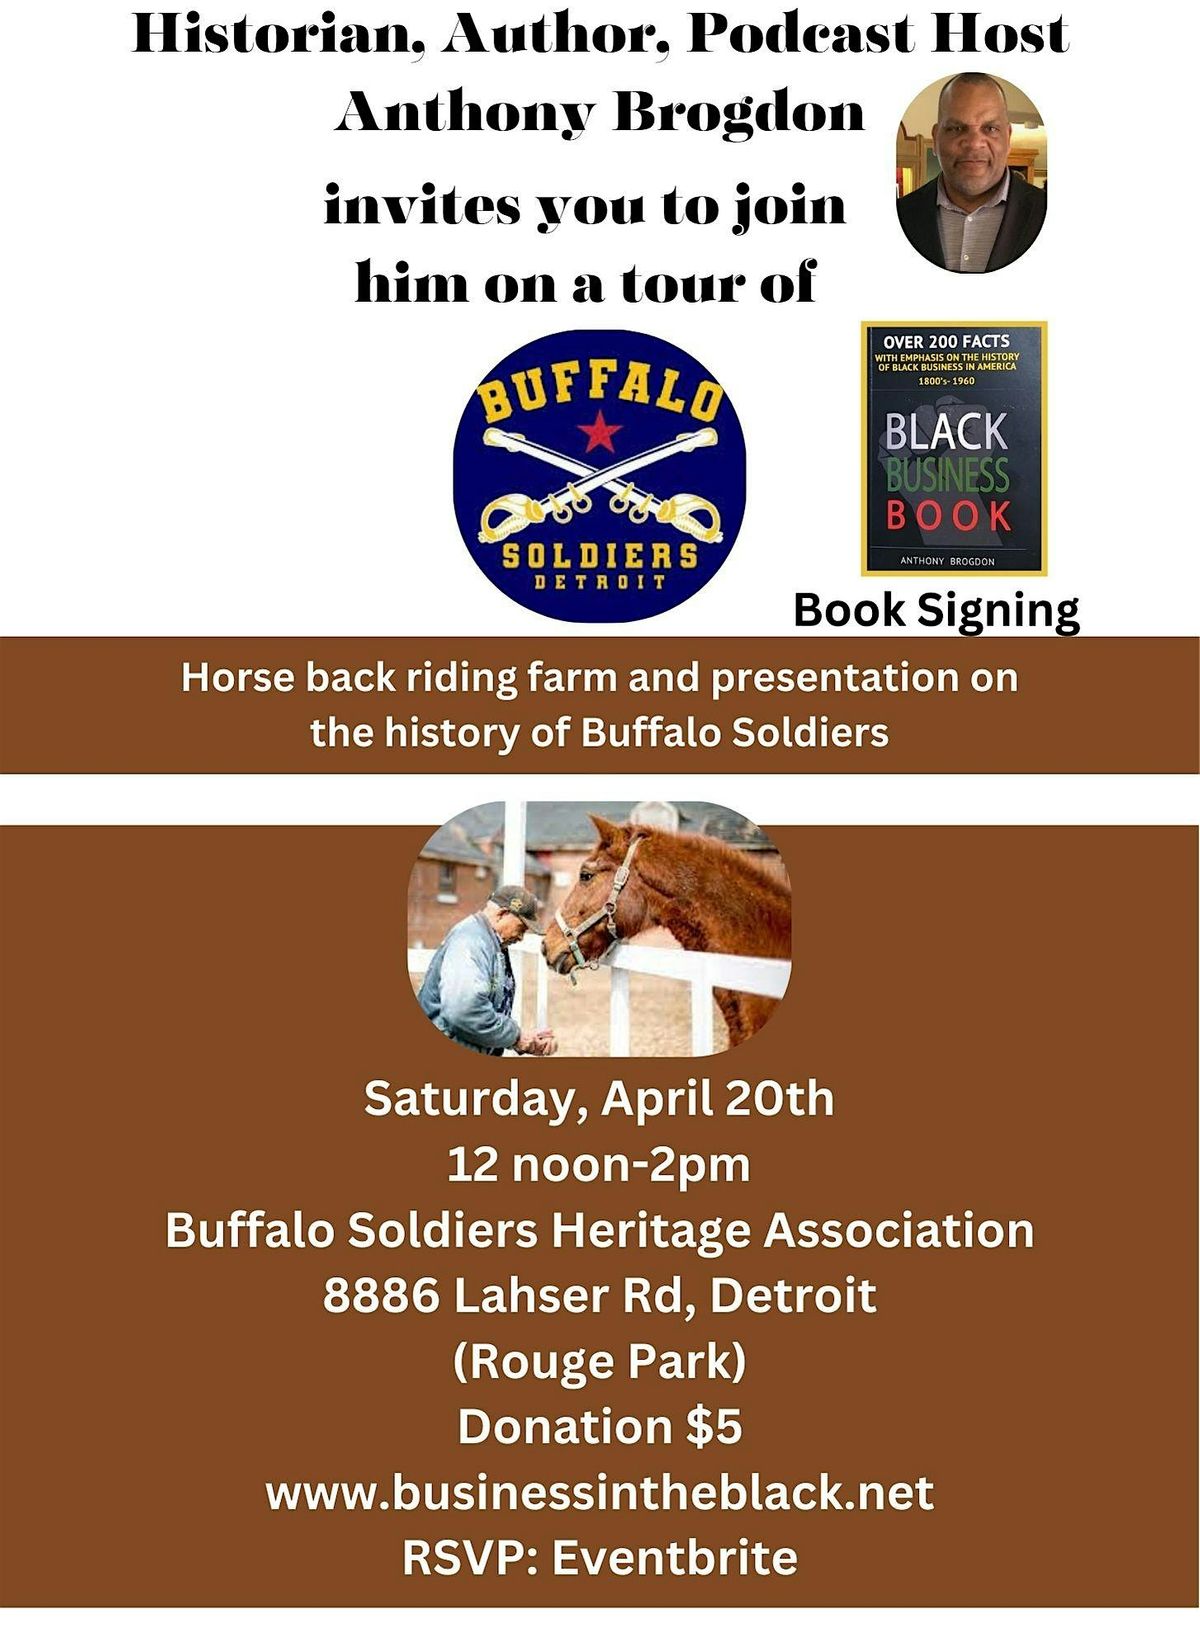 Horse back riding and buffalo soldiers presentation in Rouge Park